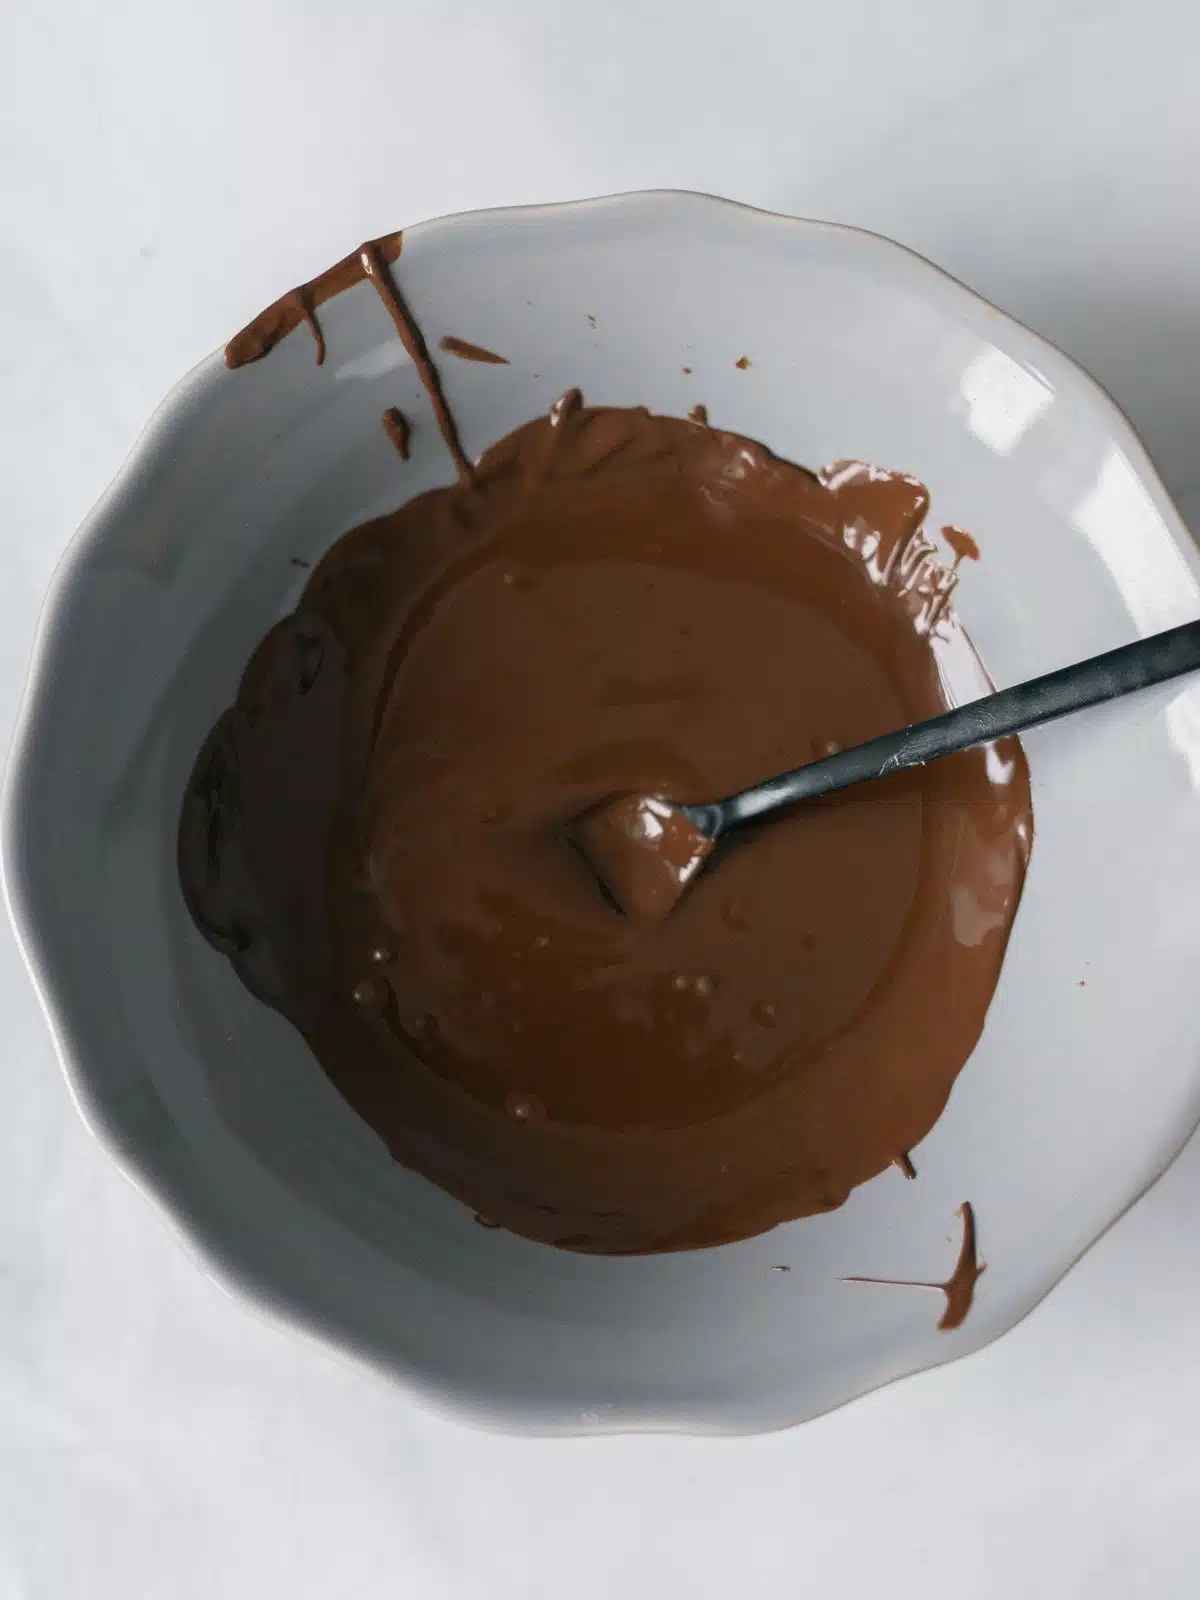 melted chocolate in white bowl with spoon.